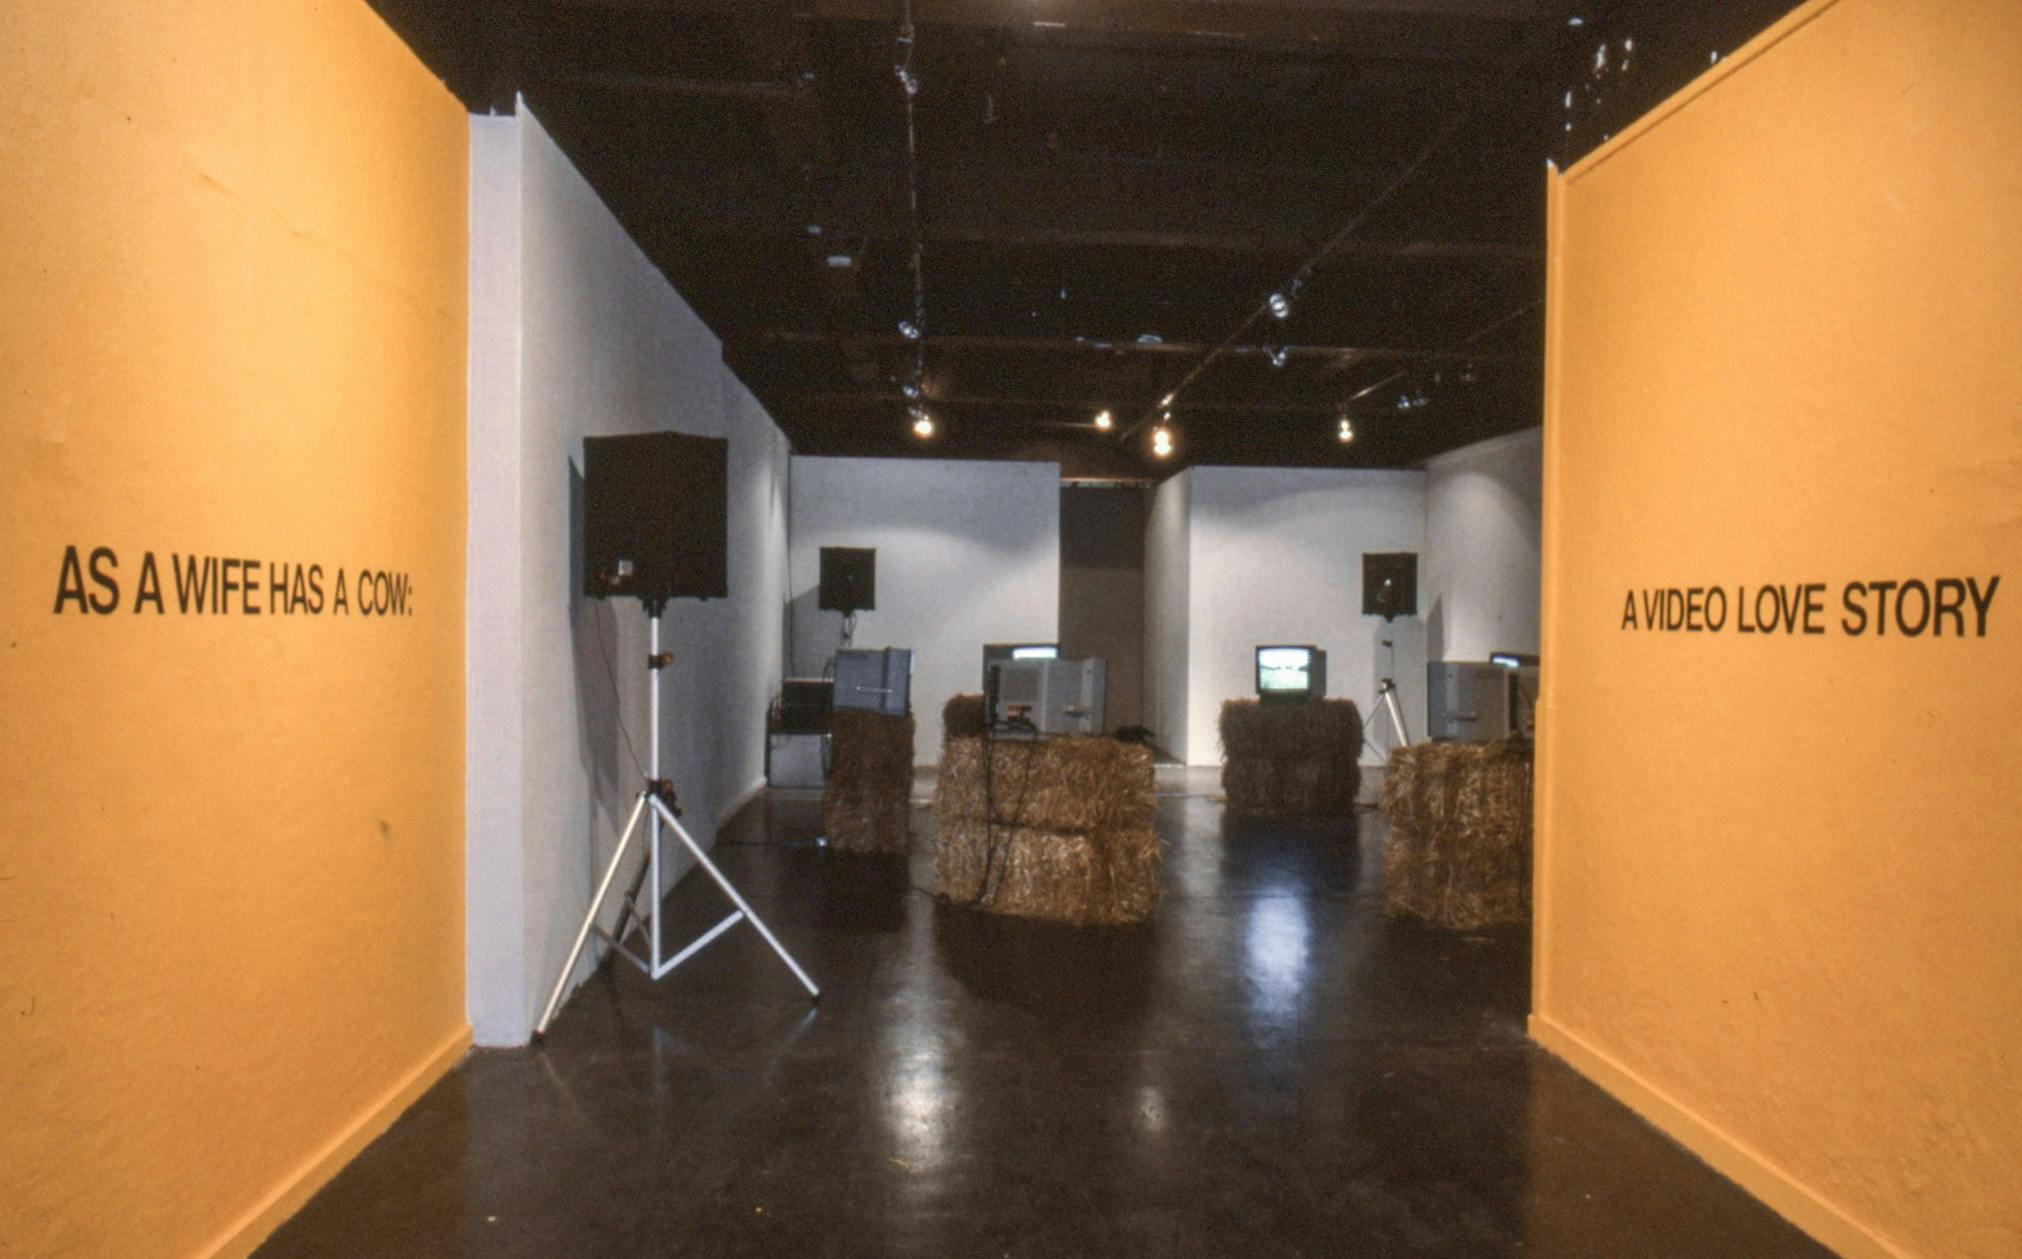 In a dimly lit gallery, there are 6 bales of hay with 6 TV's playing the same video. The entrance is painted yellow-orange, and black text on the walls reads "As A Wife Has A Cow: A Video Love Story."